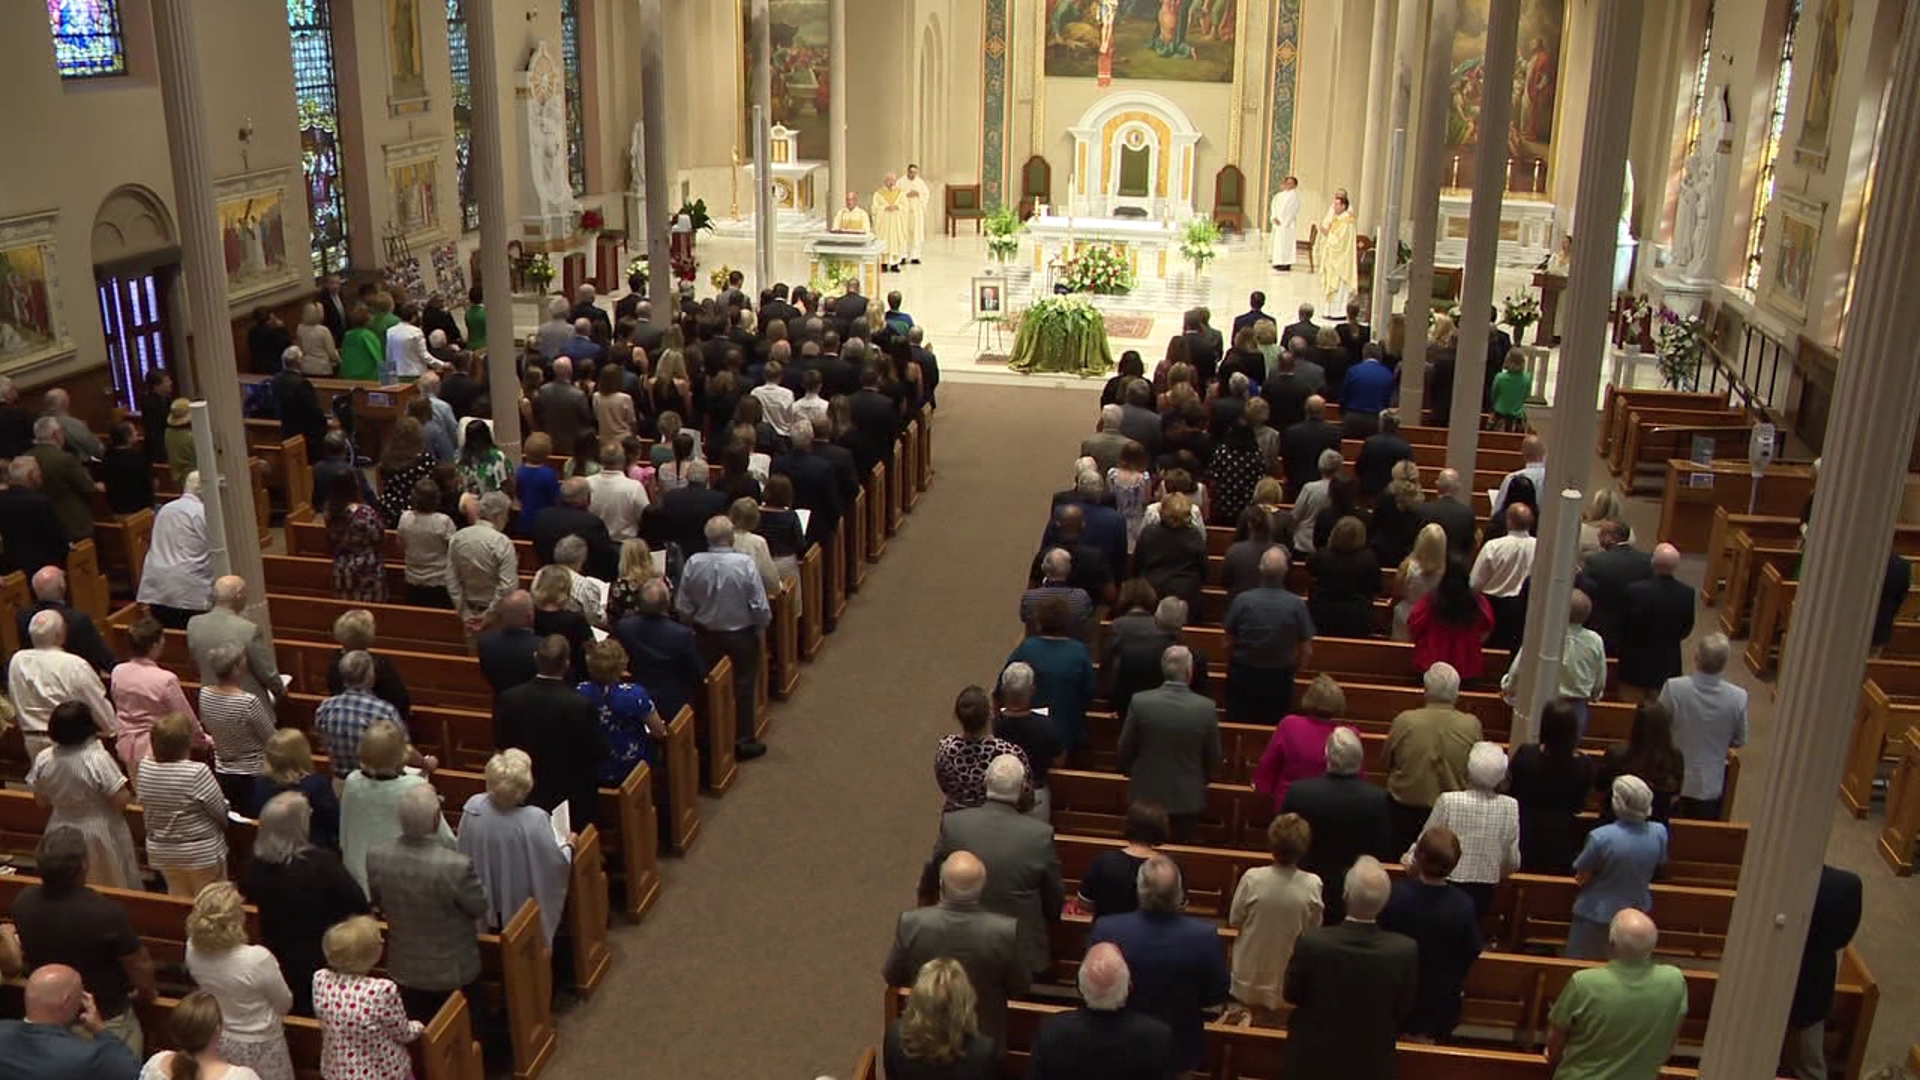 The city of Scranton laid to rest one of its biggest supporters Tuesday morning.